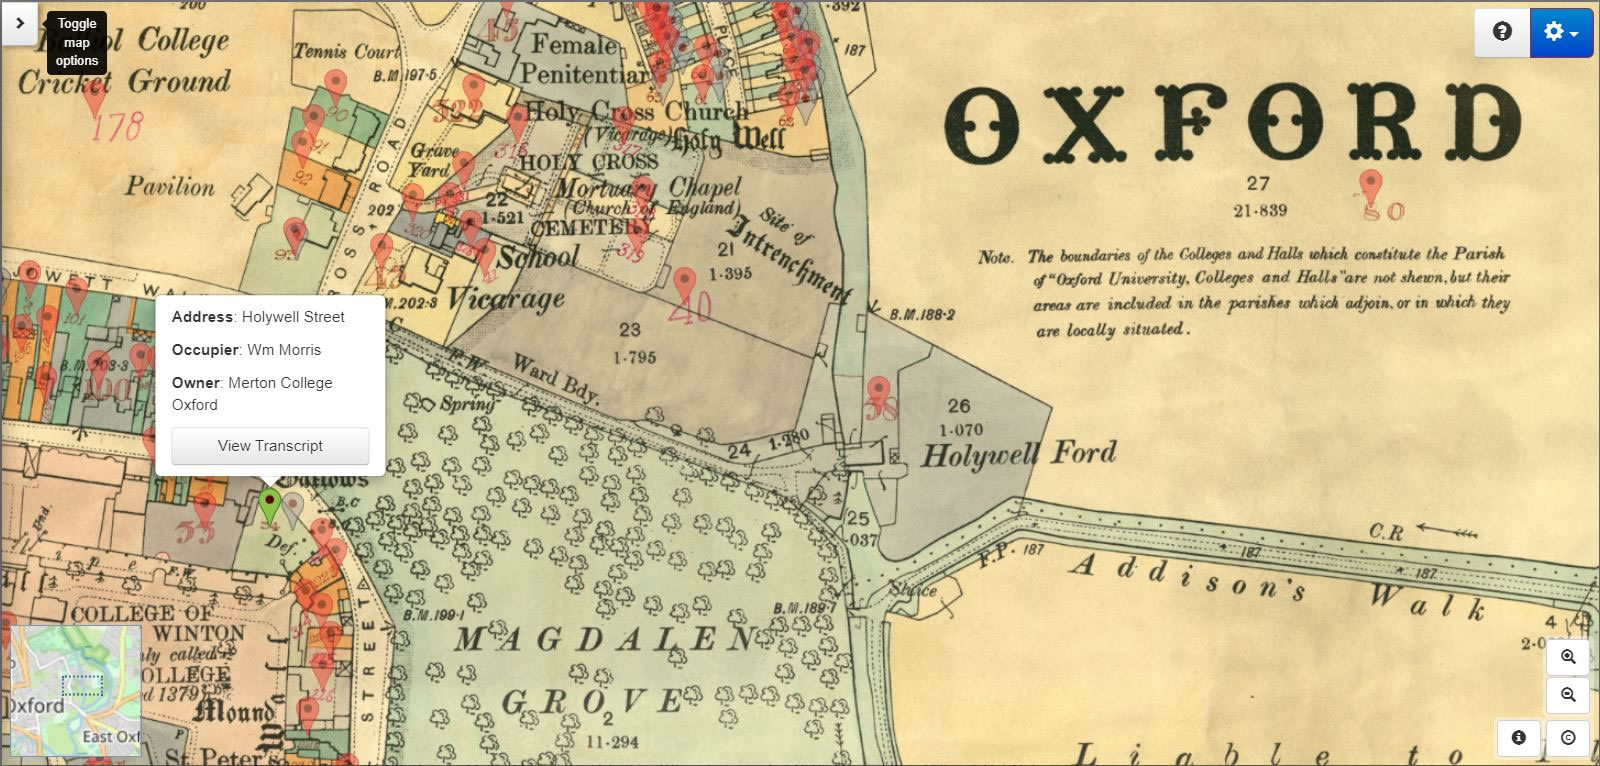 IR126 map of Oxford showing the new Morris Garage built by his landlords, Merton College